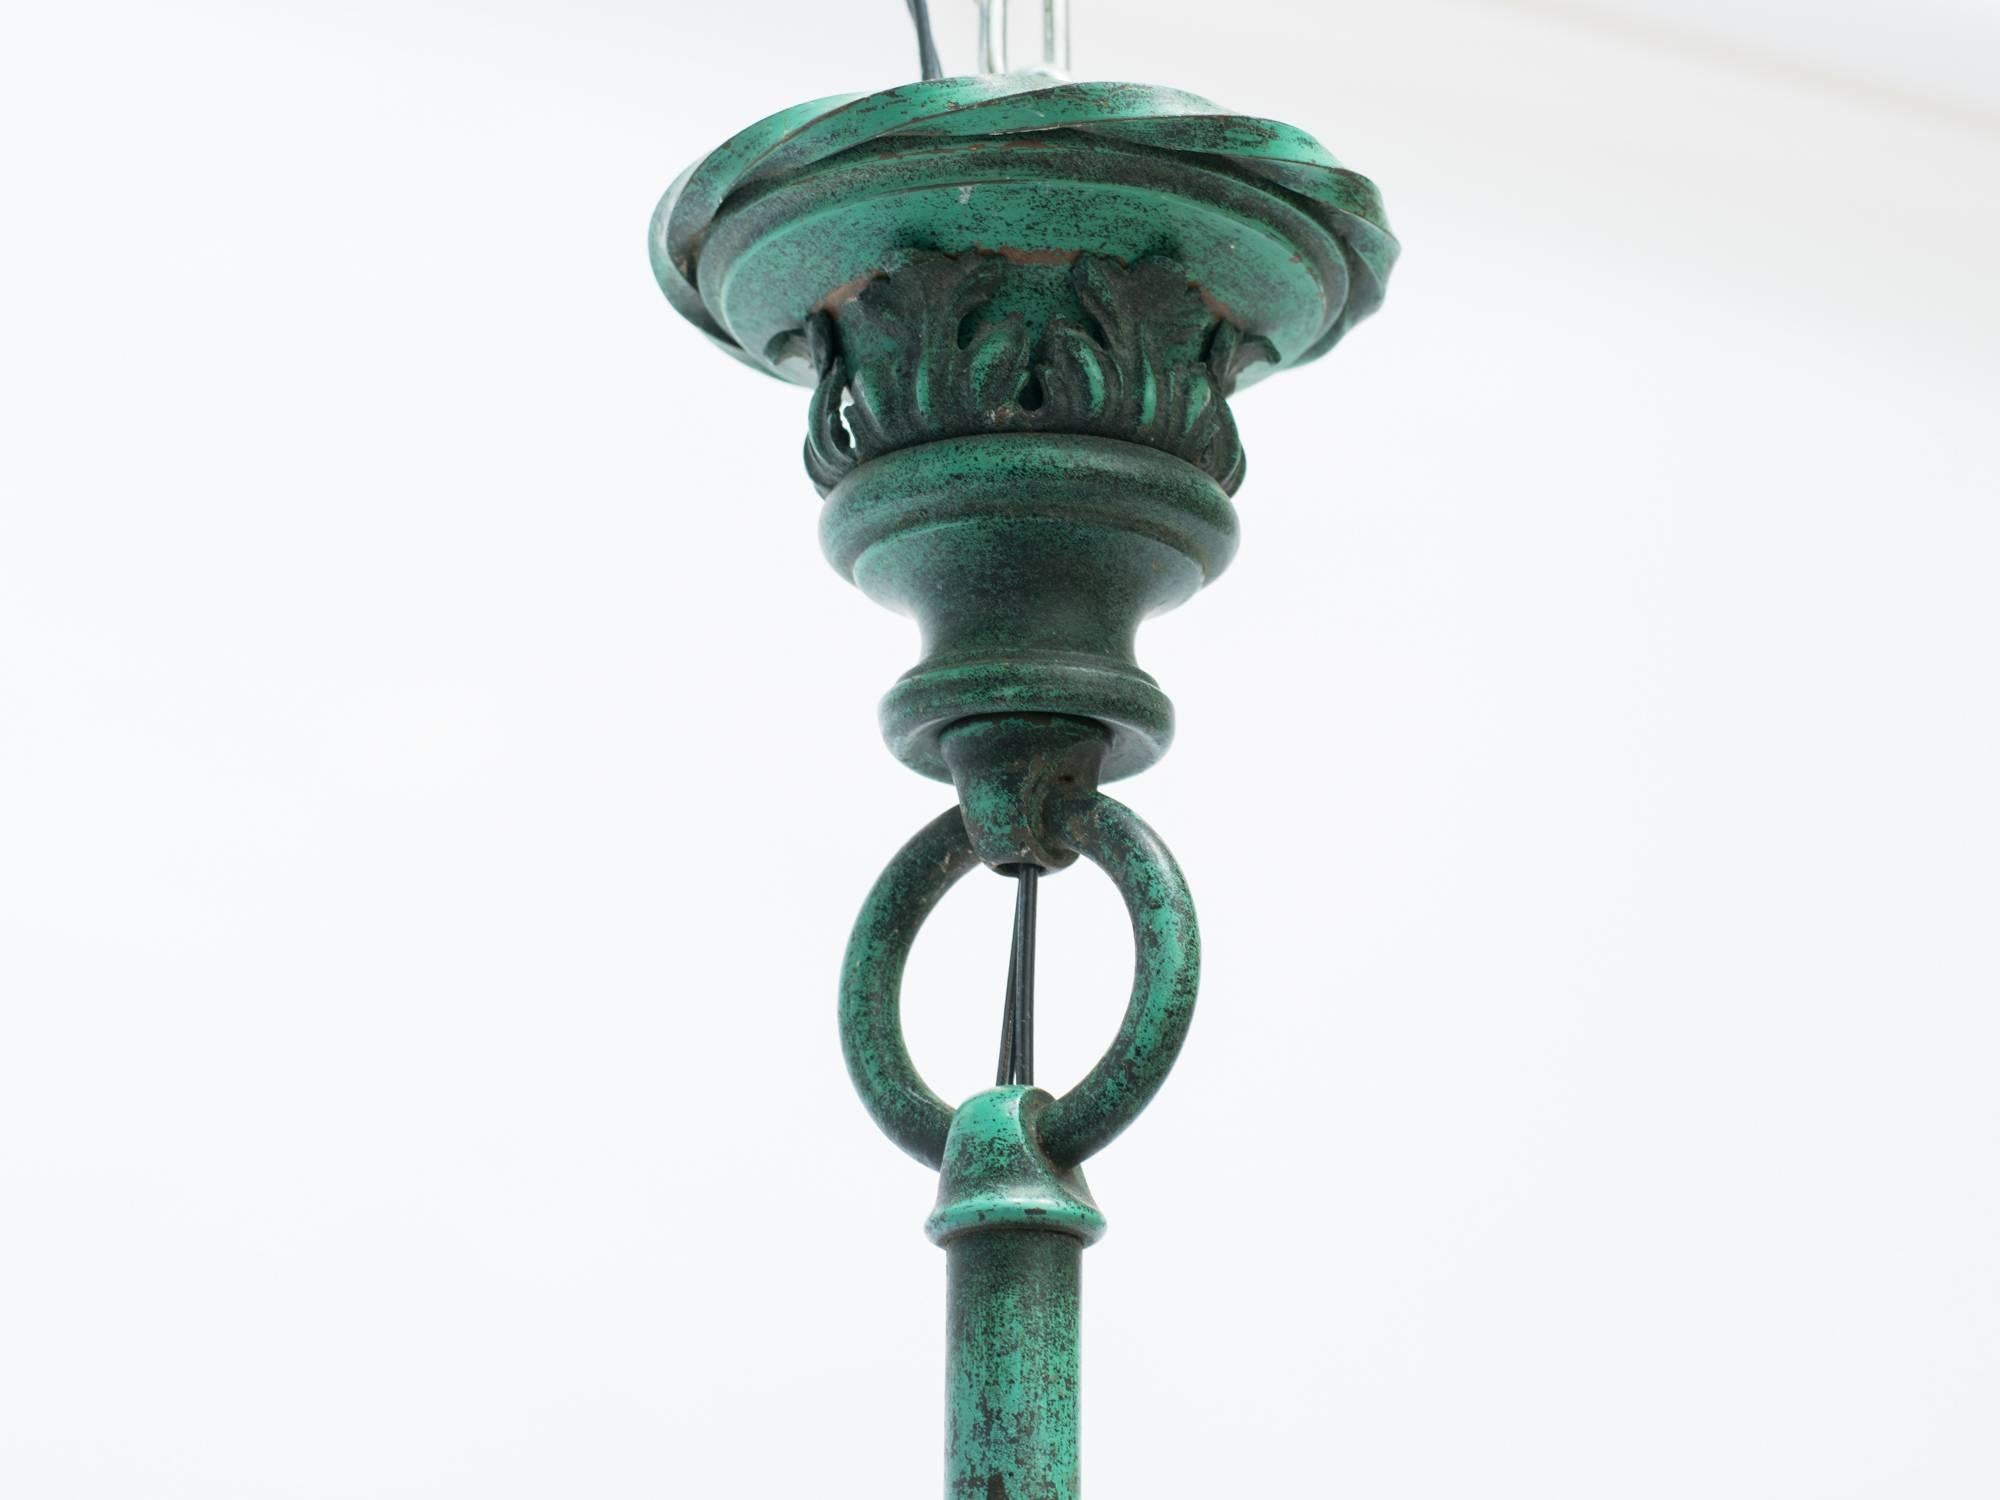 1920s bronze floral lantern with  patinated painted finish.
Chandelier has been rewired.